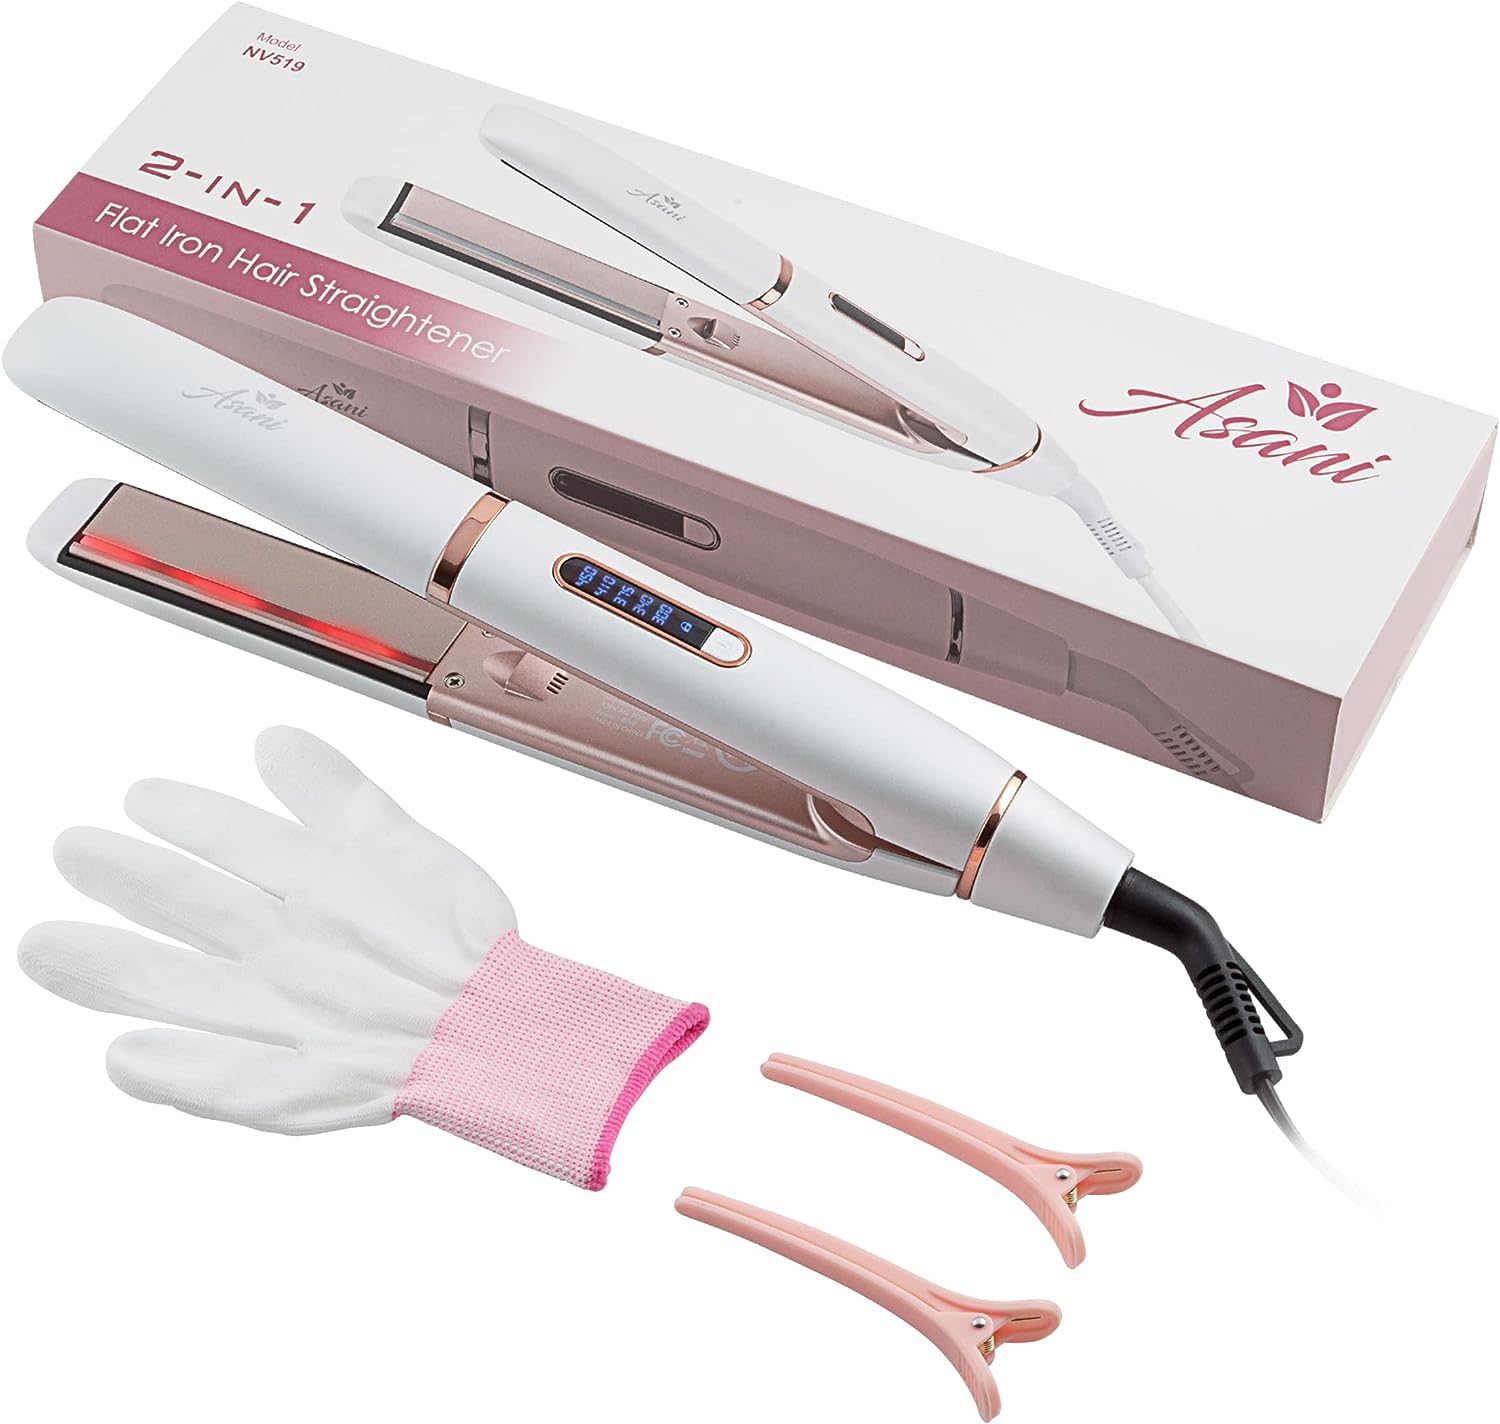 Flat Iron Hair Straightener and Curler 2 in 1 - [...]